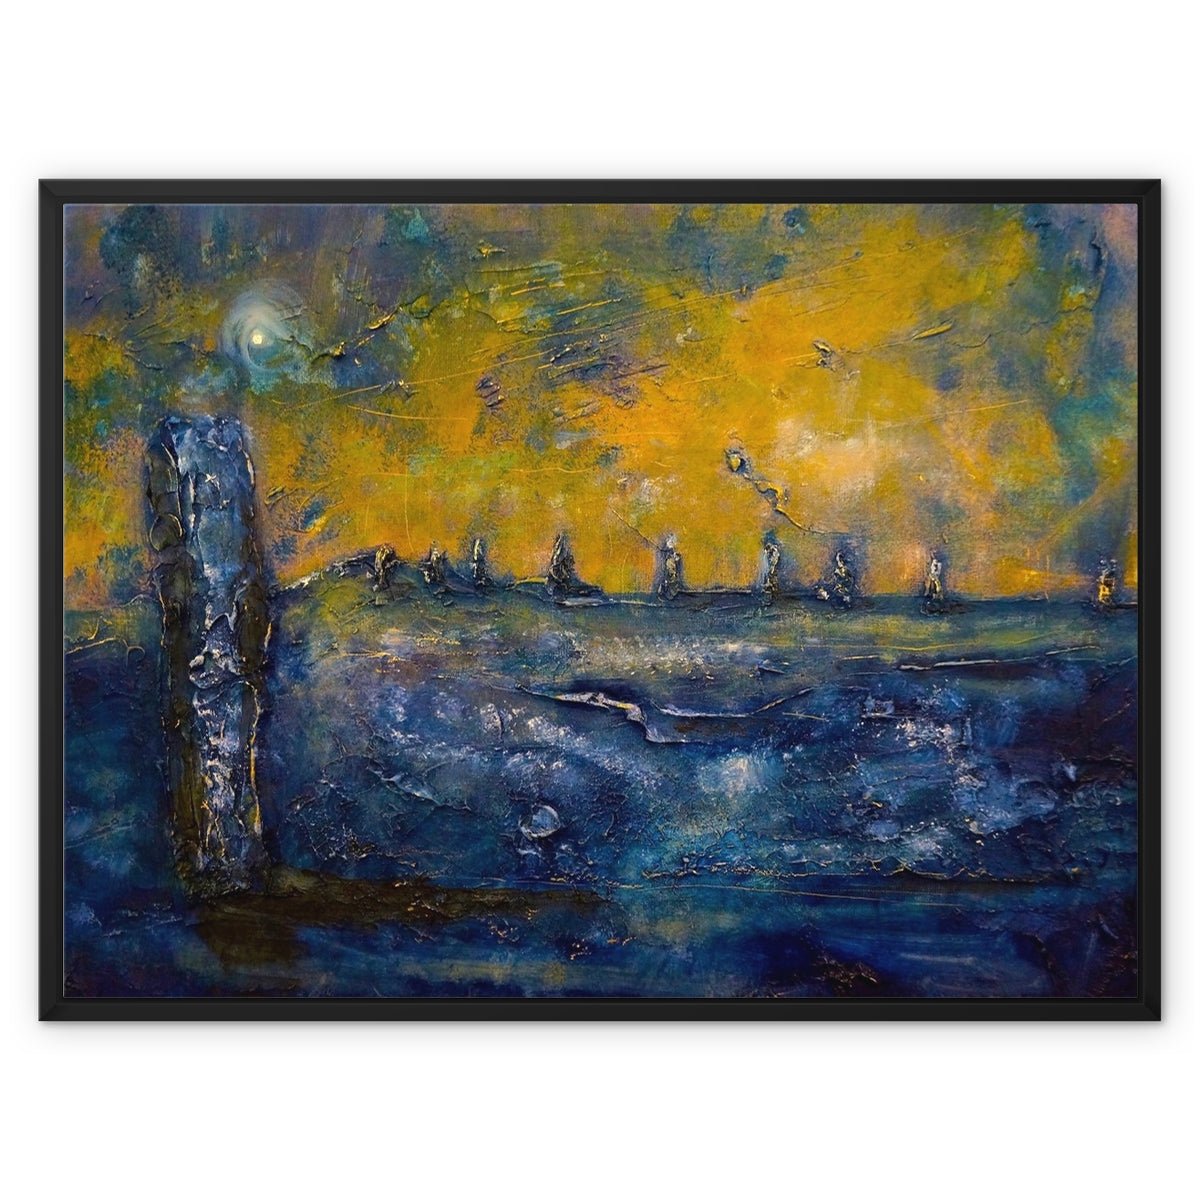 Brodgar Moonlight Orkney Painting | Framed Canvas From Scotland-Floating Framed Canvas Prints-Orkney Art Gallery-32"x24"-Black Frame-Paintings, Prints, Homeware, Art Gifts From Scotland By Scottish Artist Kevin Hunter